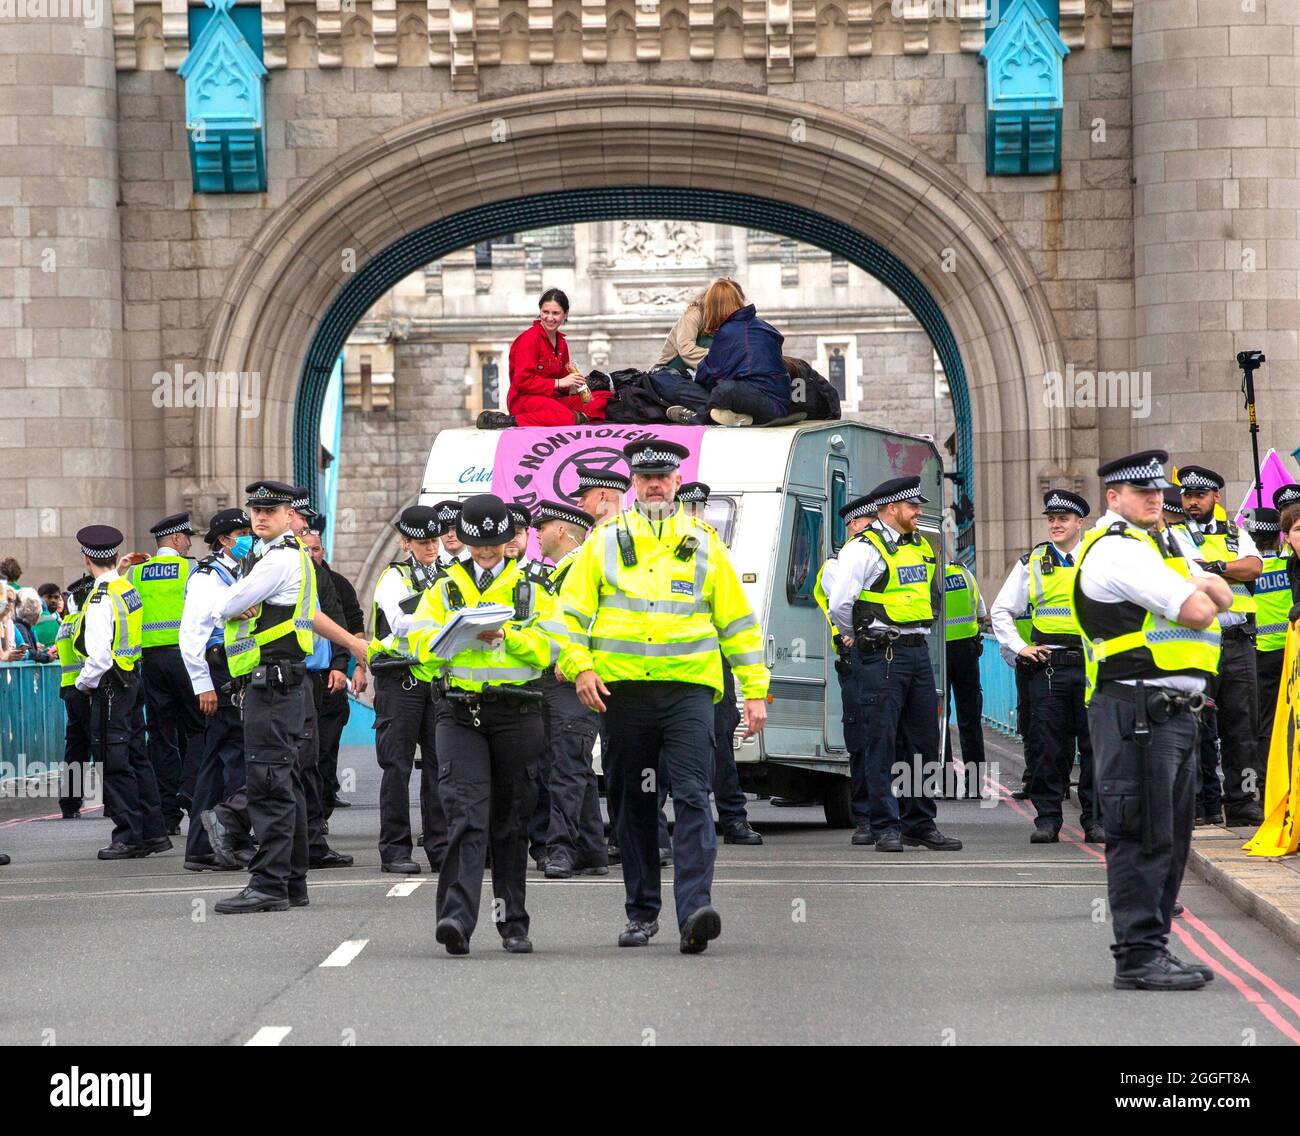 London, UK. 30th Aug, 2021. London, UK 30 8 21 Demonstrators on top of a caravan blocking the road at Tower Bridge. Members of Extinction Rebellion march from The Shard to Tower Bridge where supporters climb on top of a caravan and block the road. Extinction Rebellion Credit: Mark Thomas/Alamy Live News Stock Photo